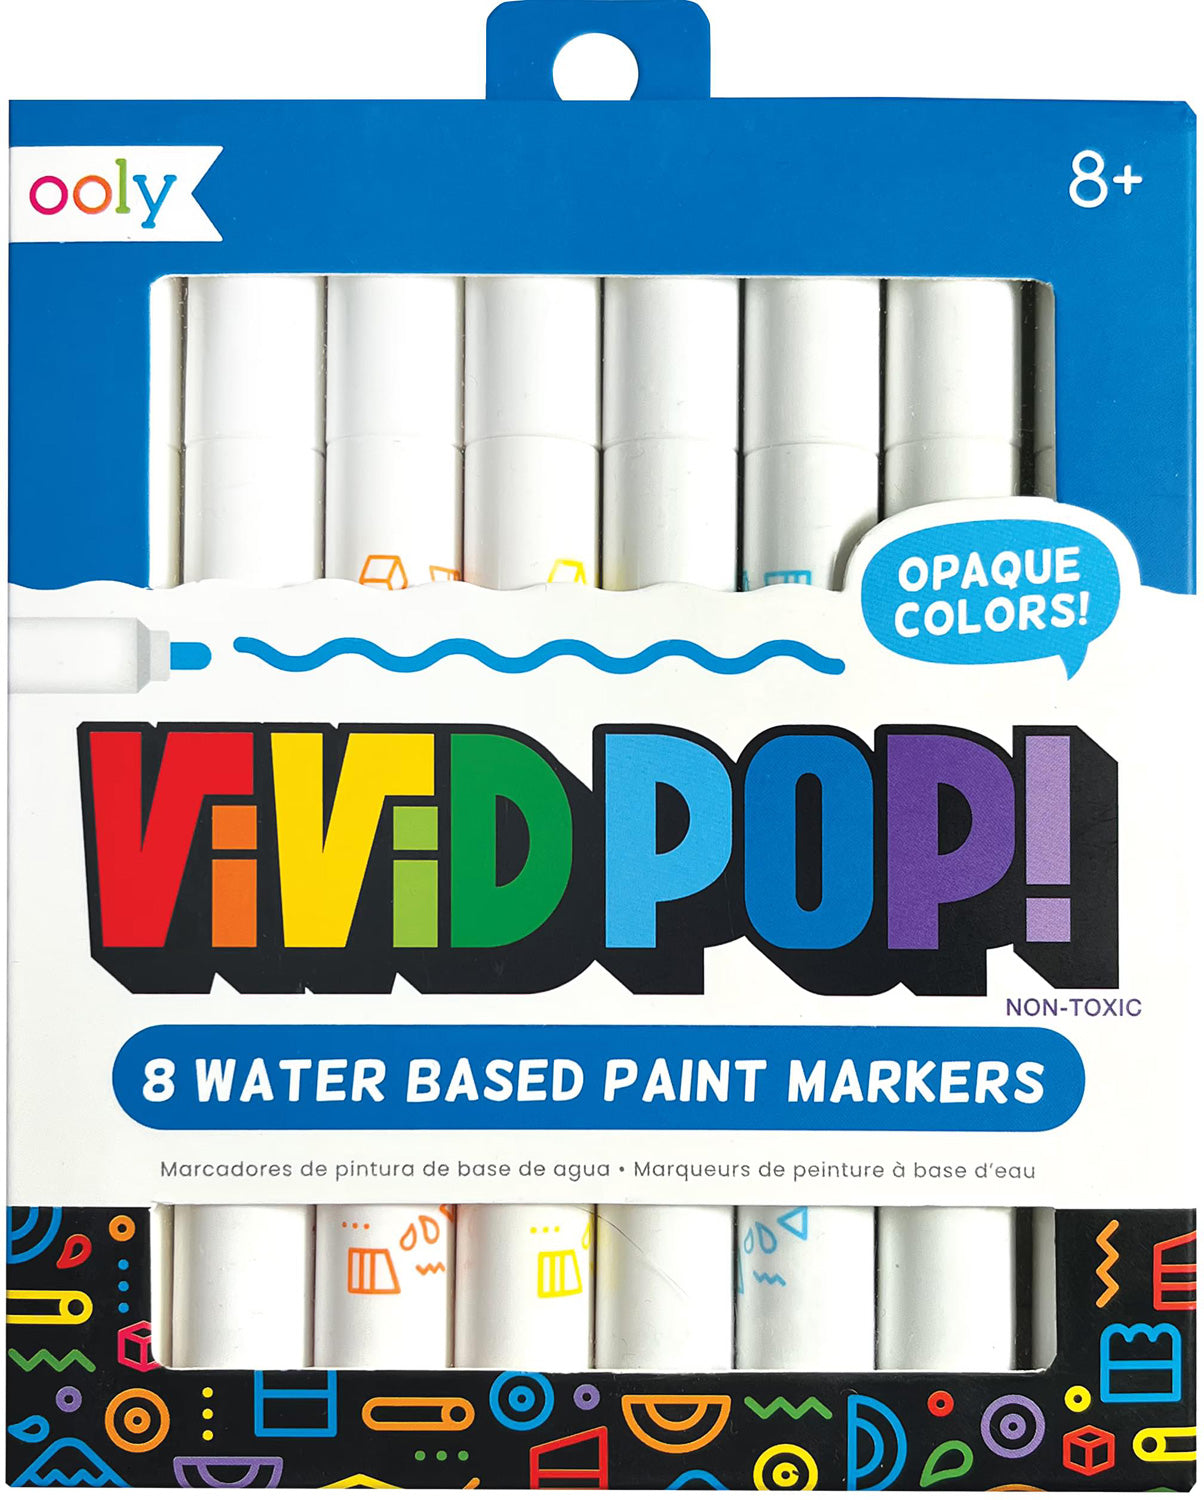 Vivid Pop! Water Based Paint Markers 8 Pack by Ooly #130-110